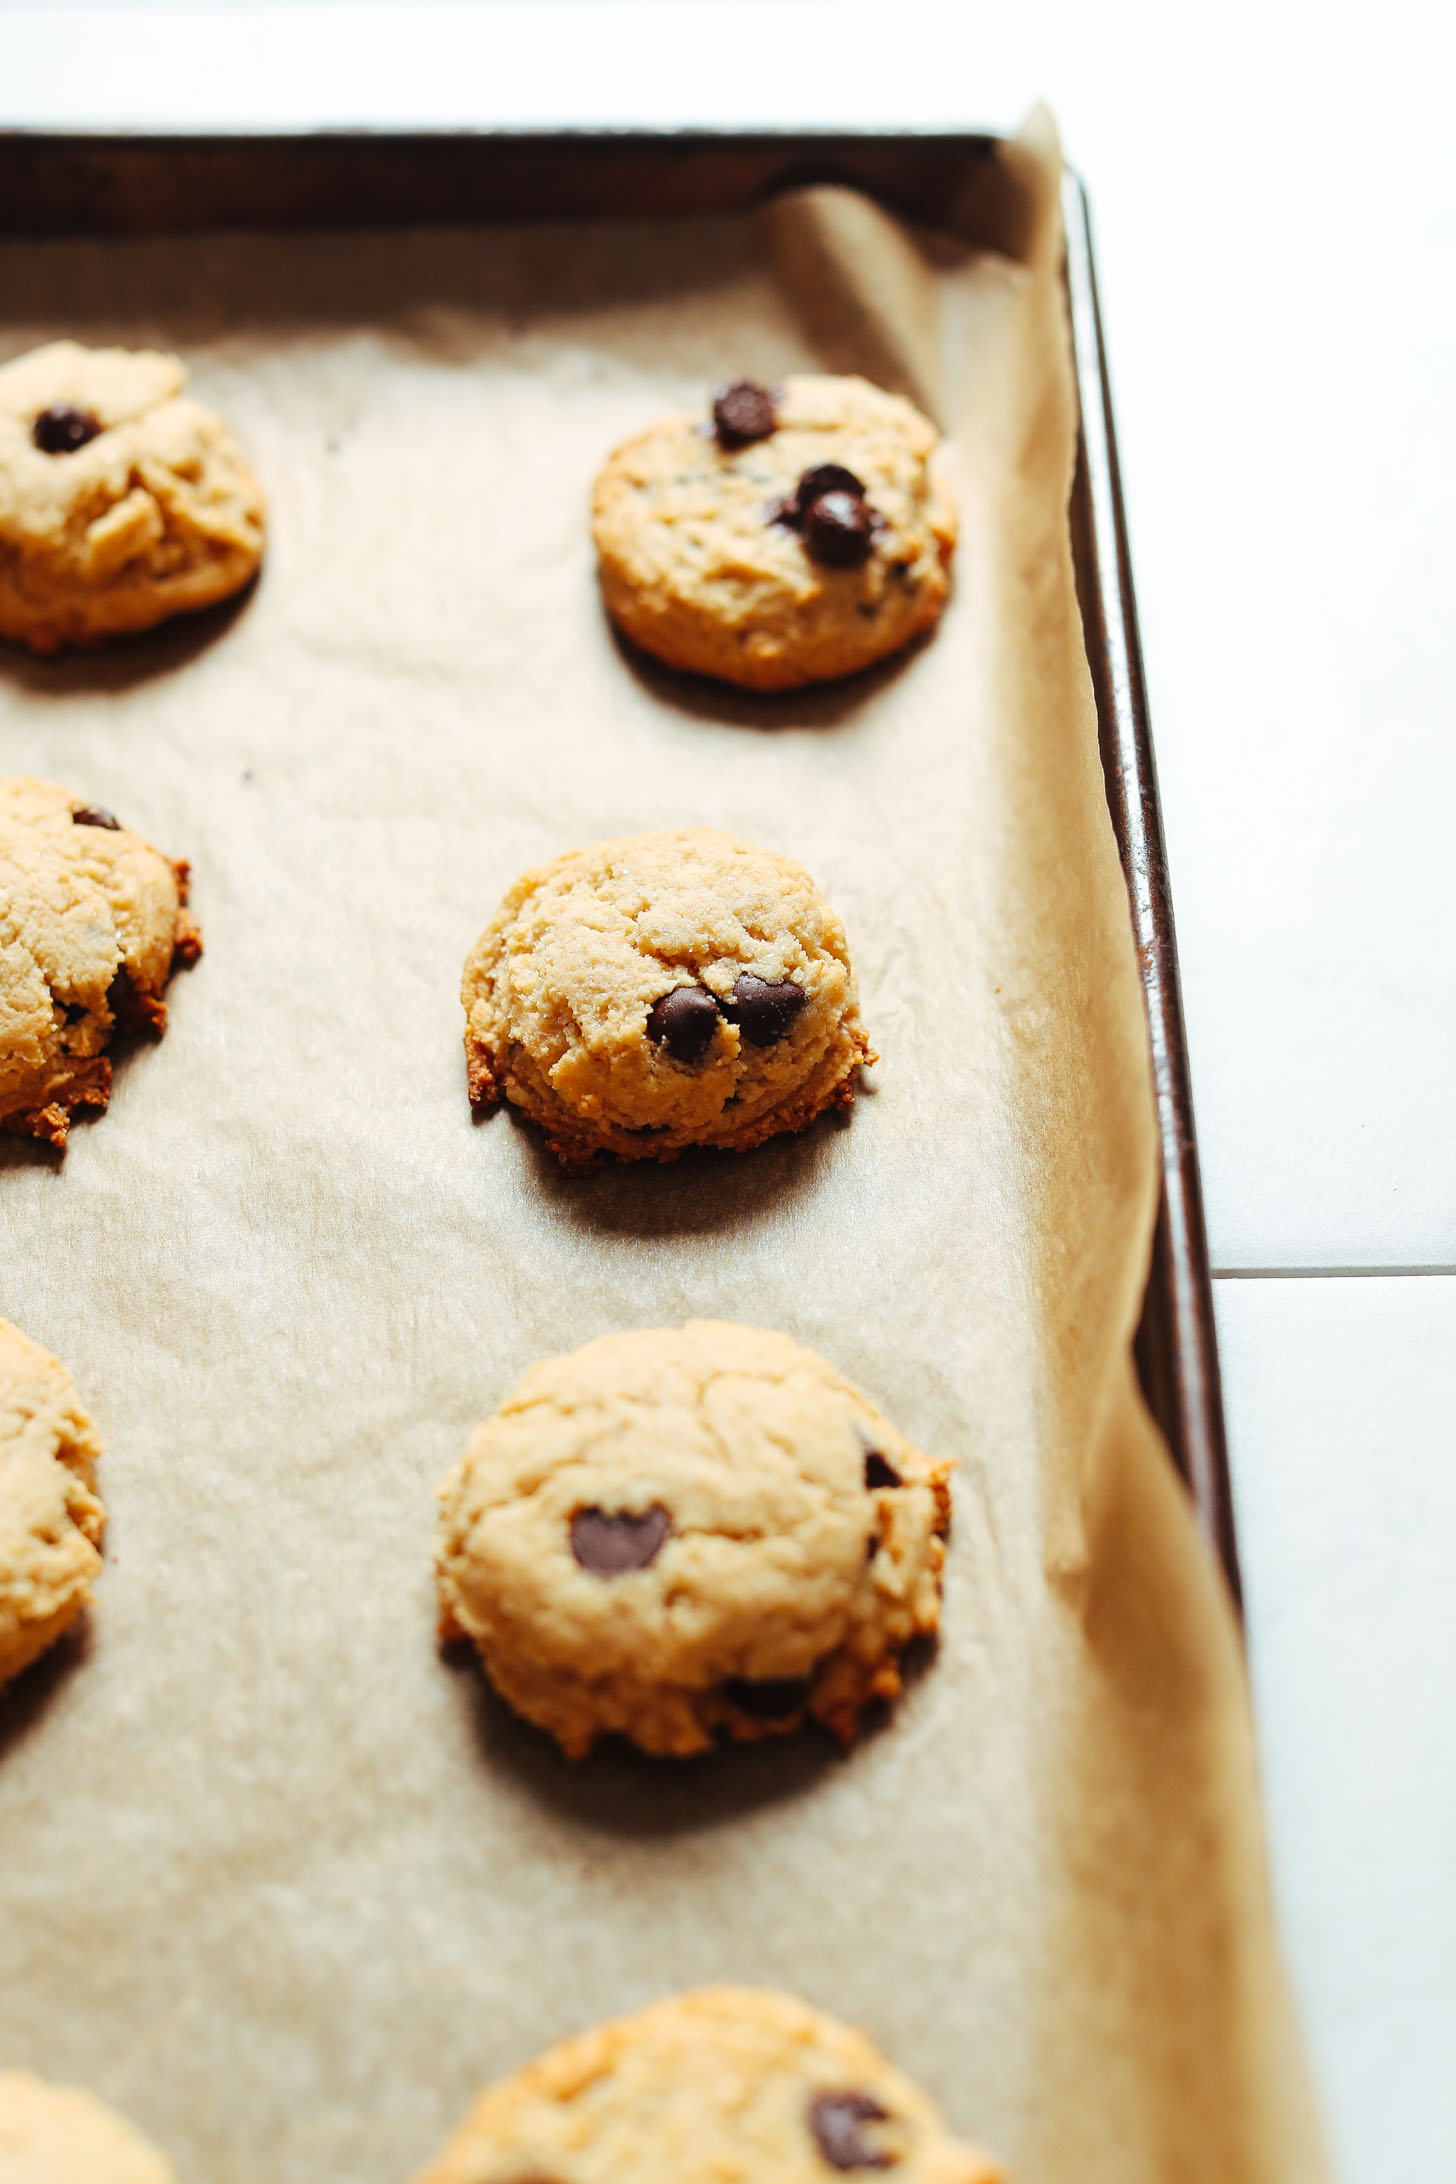 Parchment-lined baking sheet with a batch of Vegan Gluten-Free Chocolate Chip Cookies